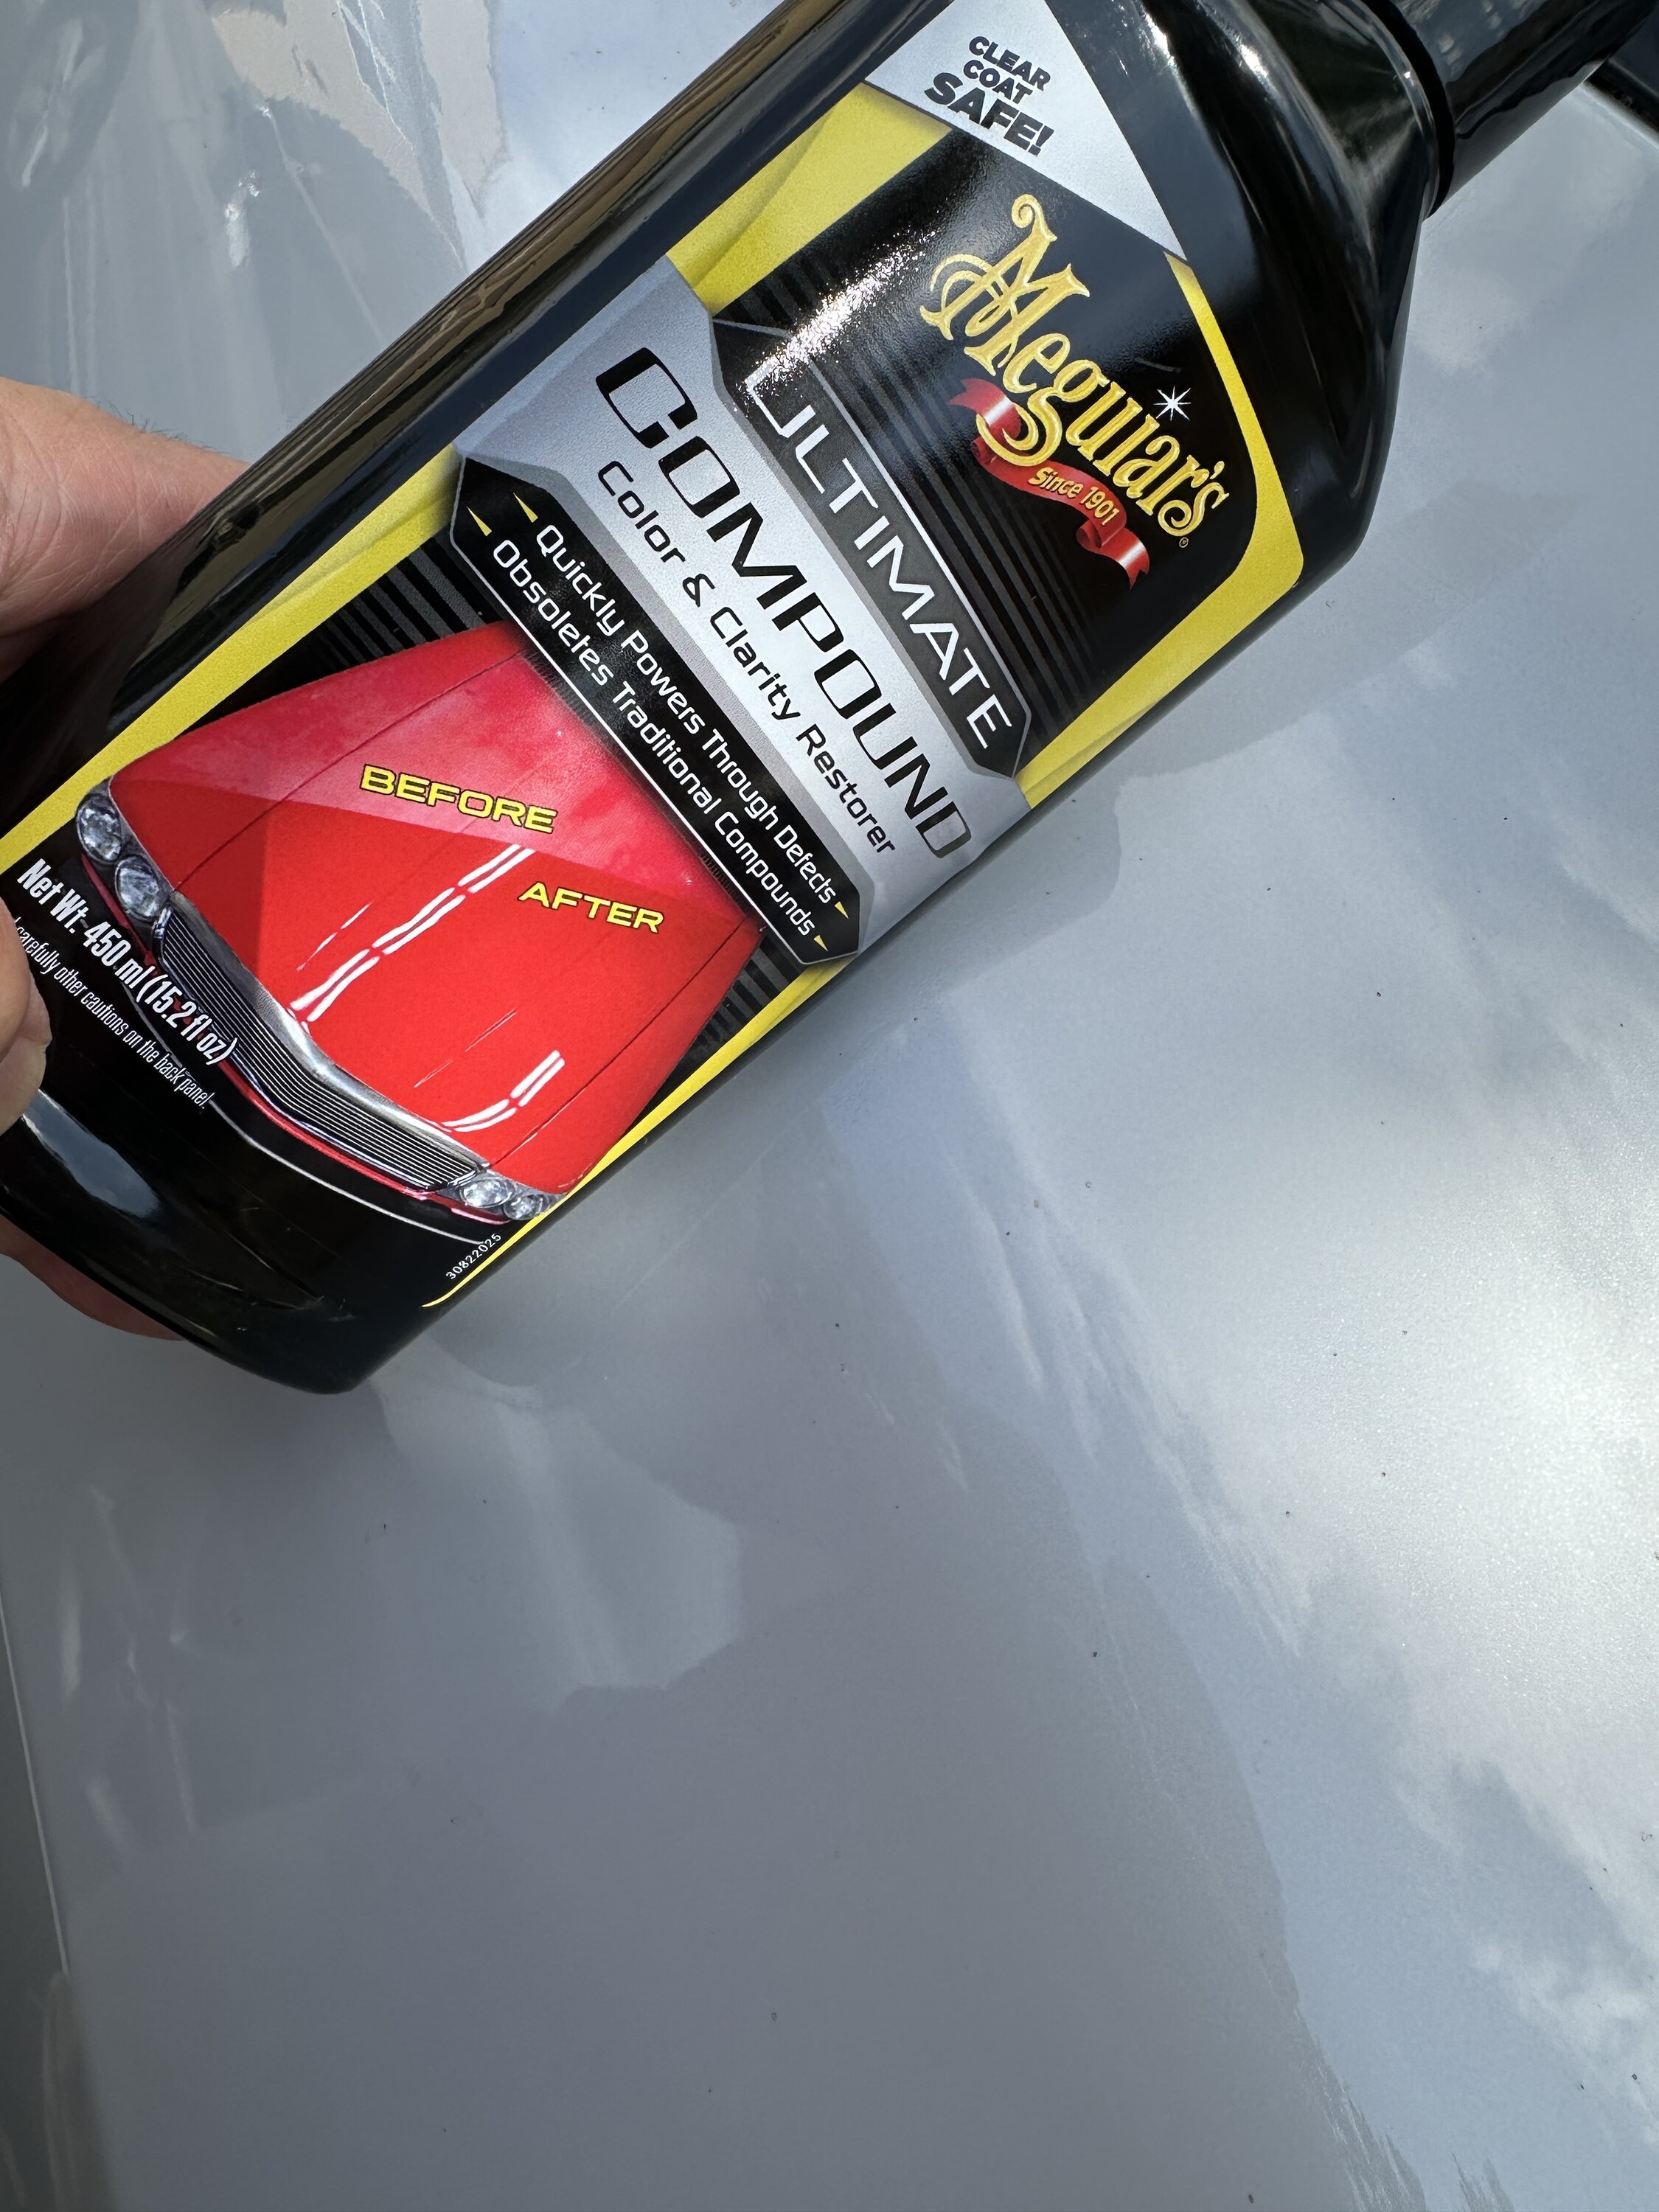 Meguiar's Ultimate Compound worked well on gloss black plastic